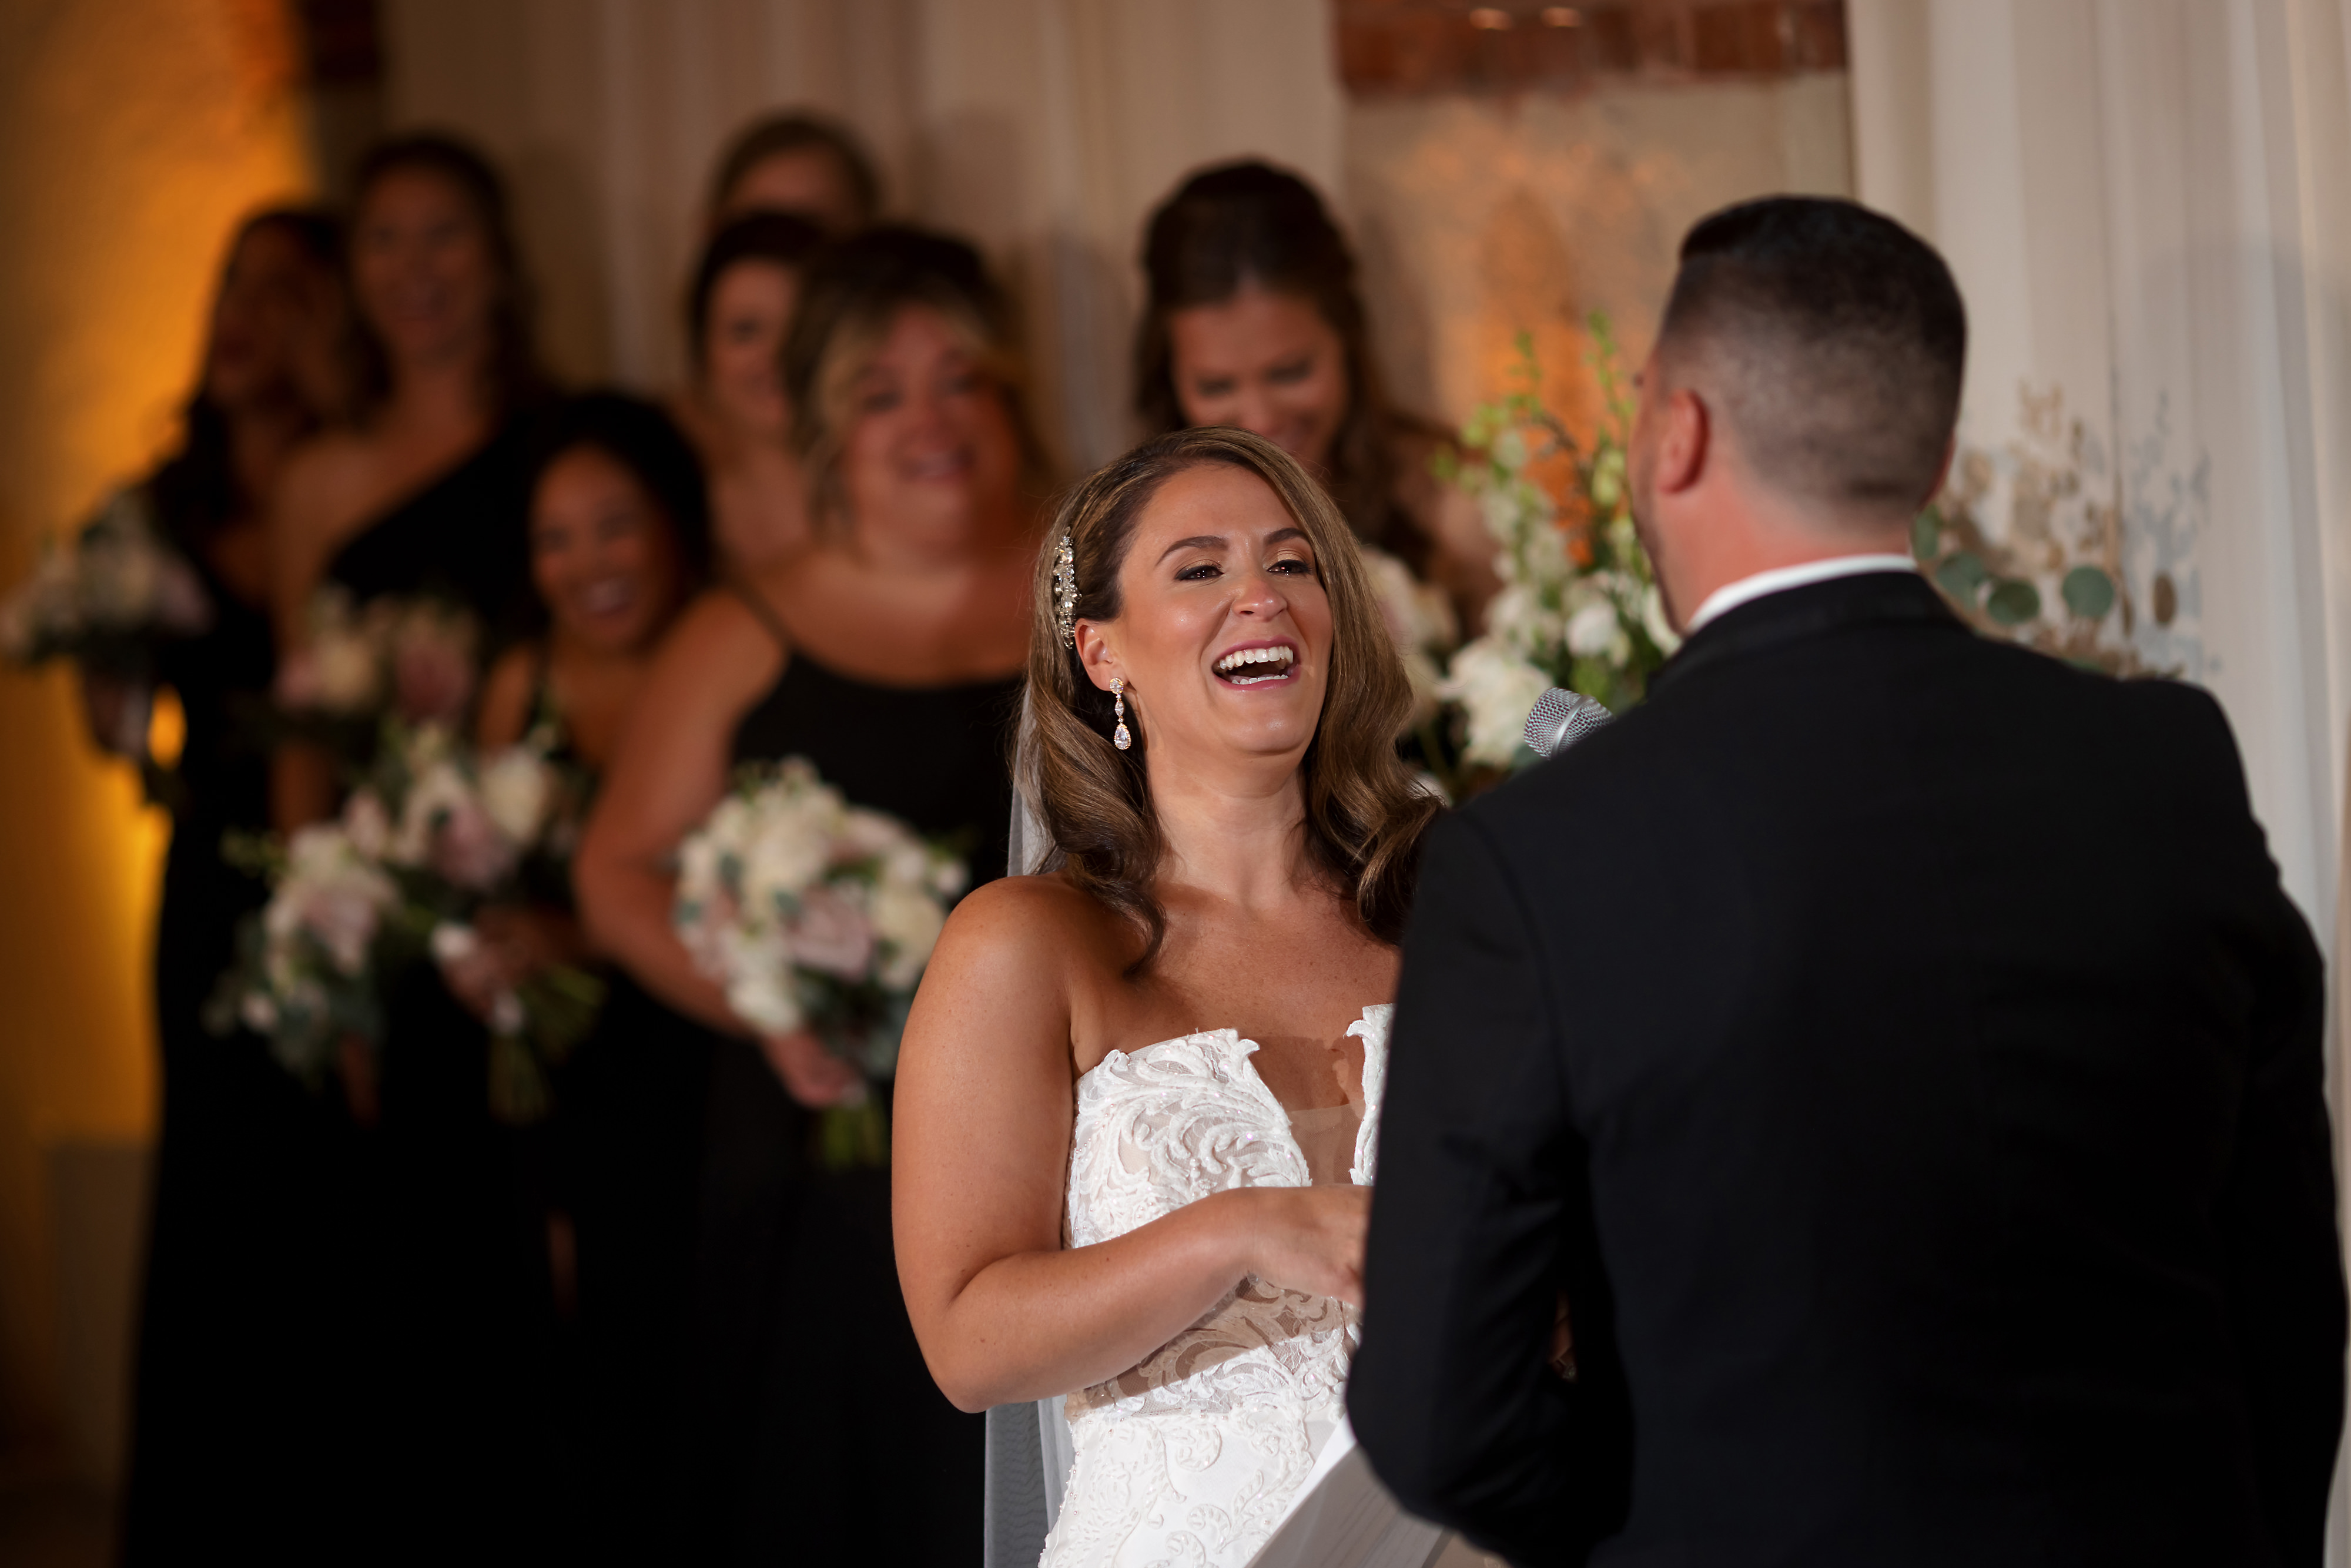 Bride laughs during wedding ceremony at Artifact Events in Chicago's Ravenswood neighborhood.